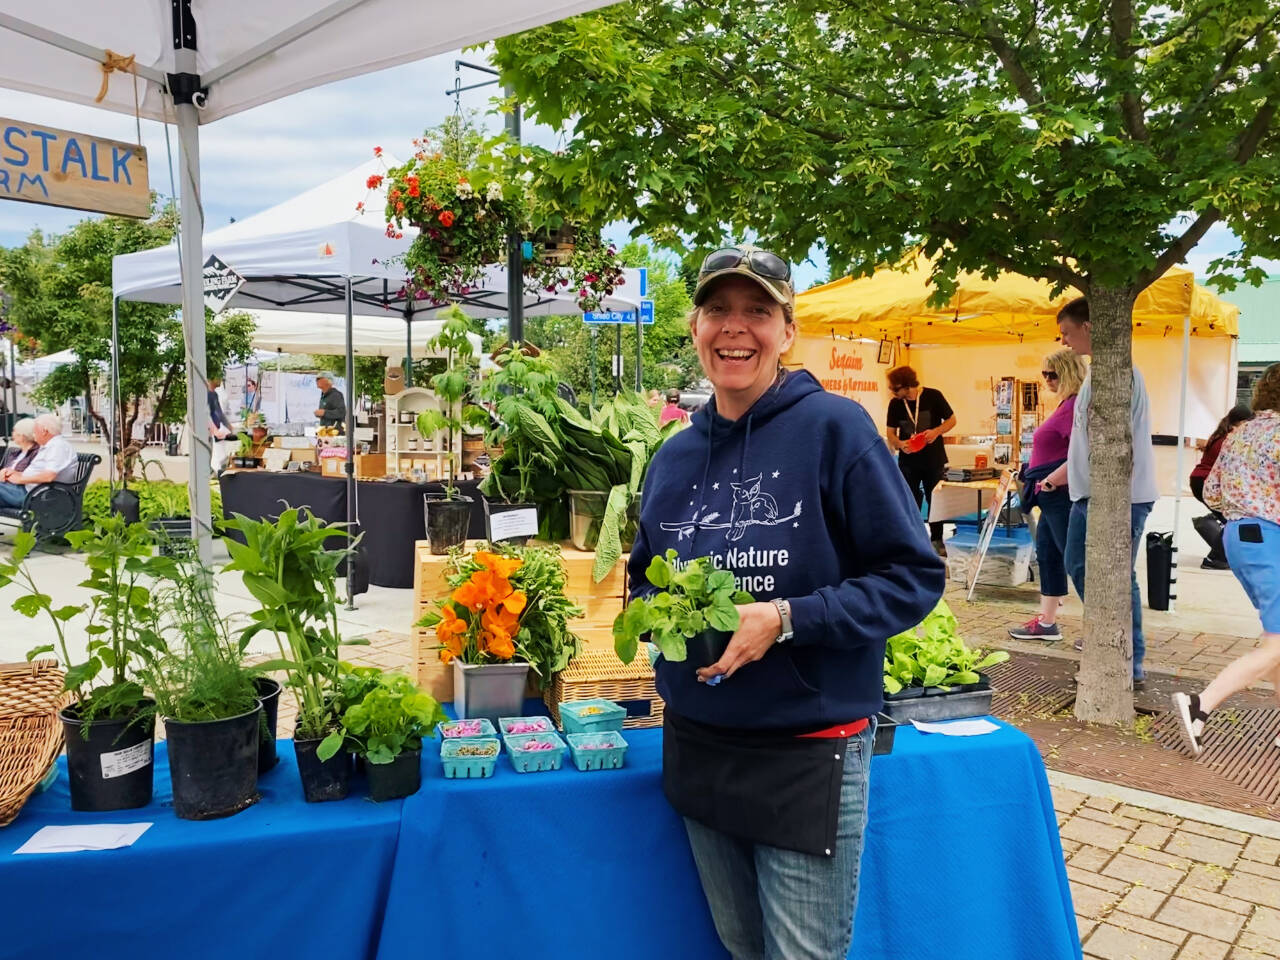 Photo by Emma Jane Garcia, Sequim Farmers & Artisans Market
Kia Armstrong leads operations with Beanstalk Farms.